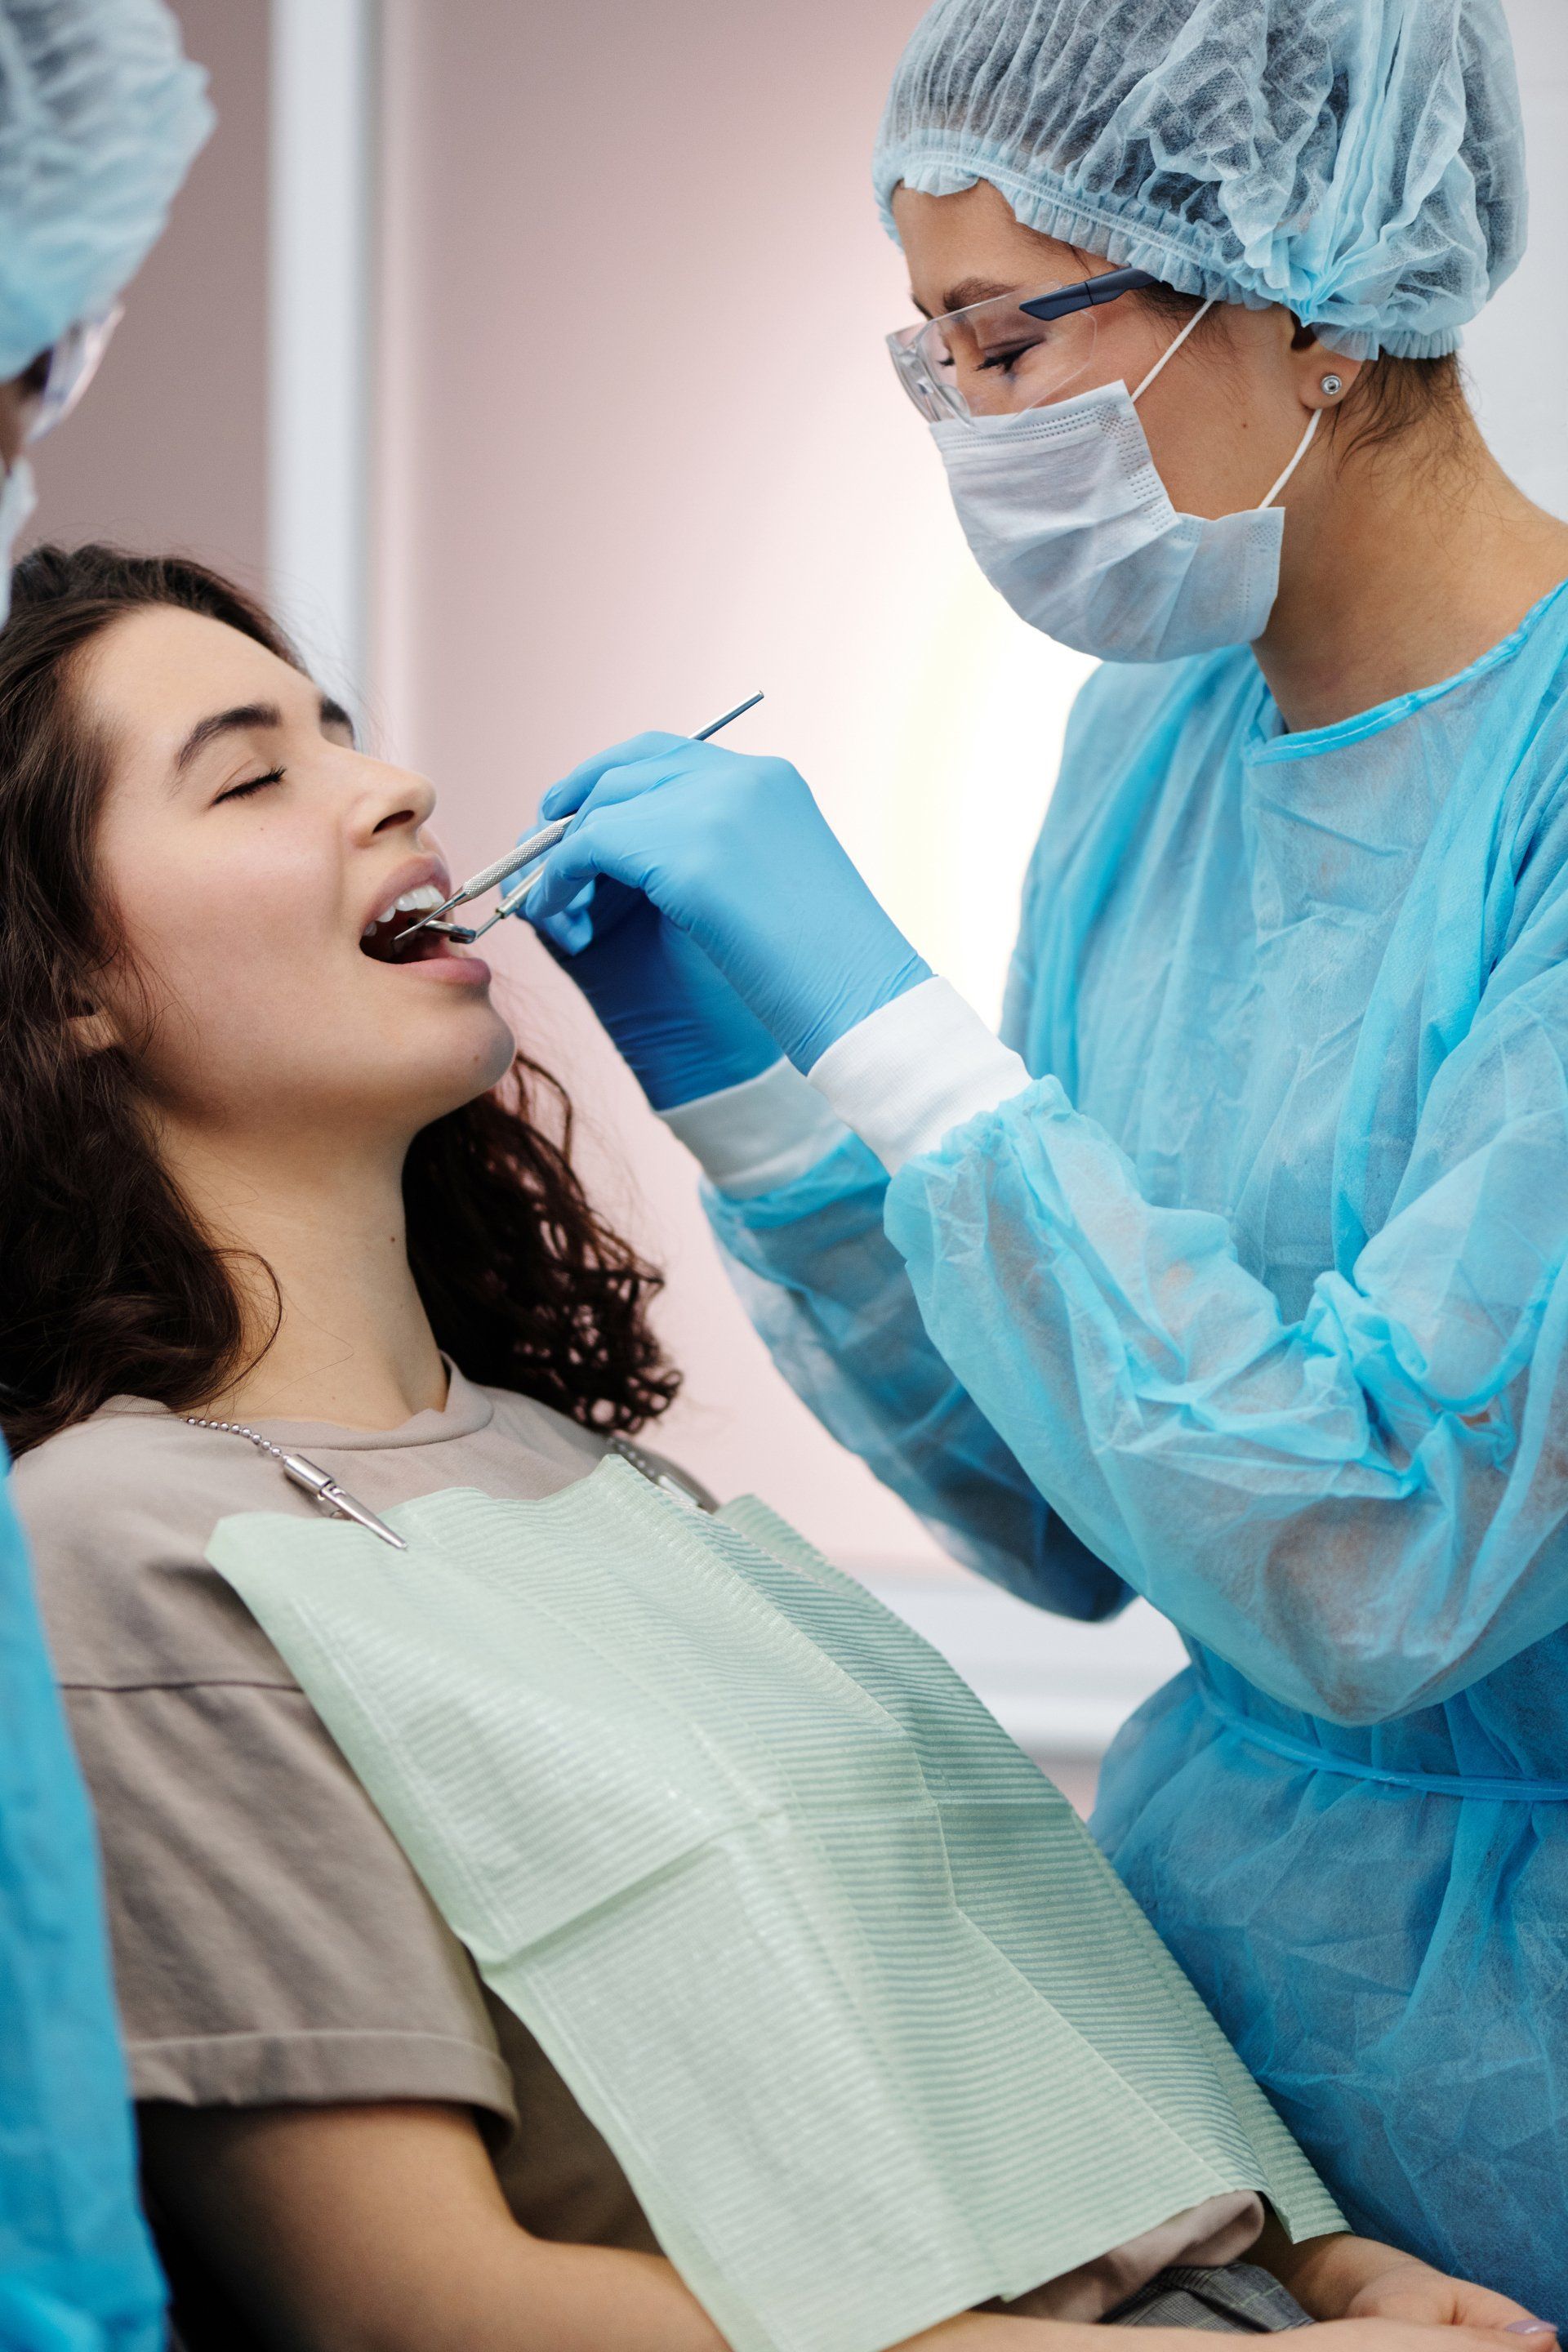 What You Need to Know About Tooth Fillings